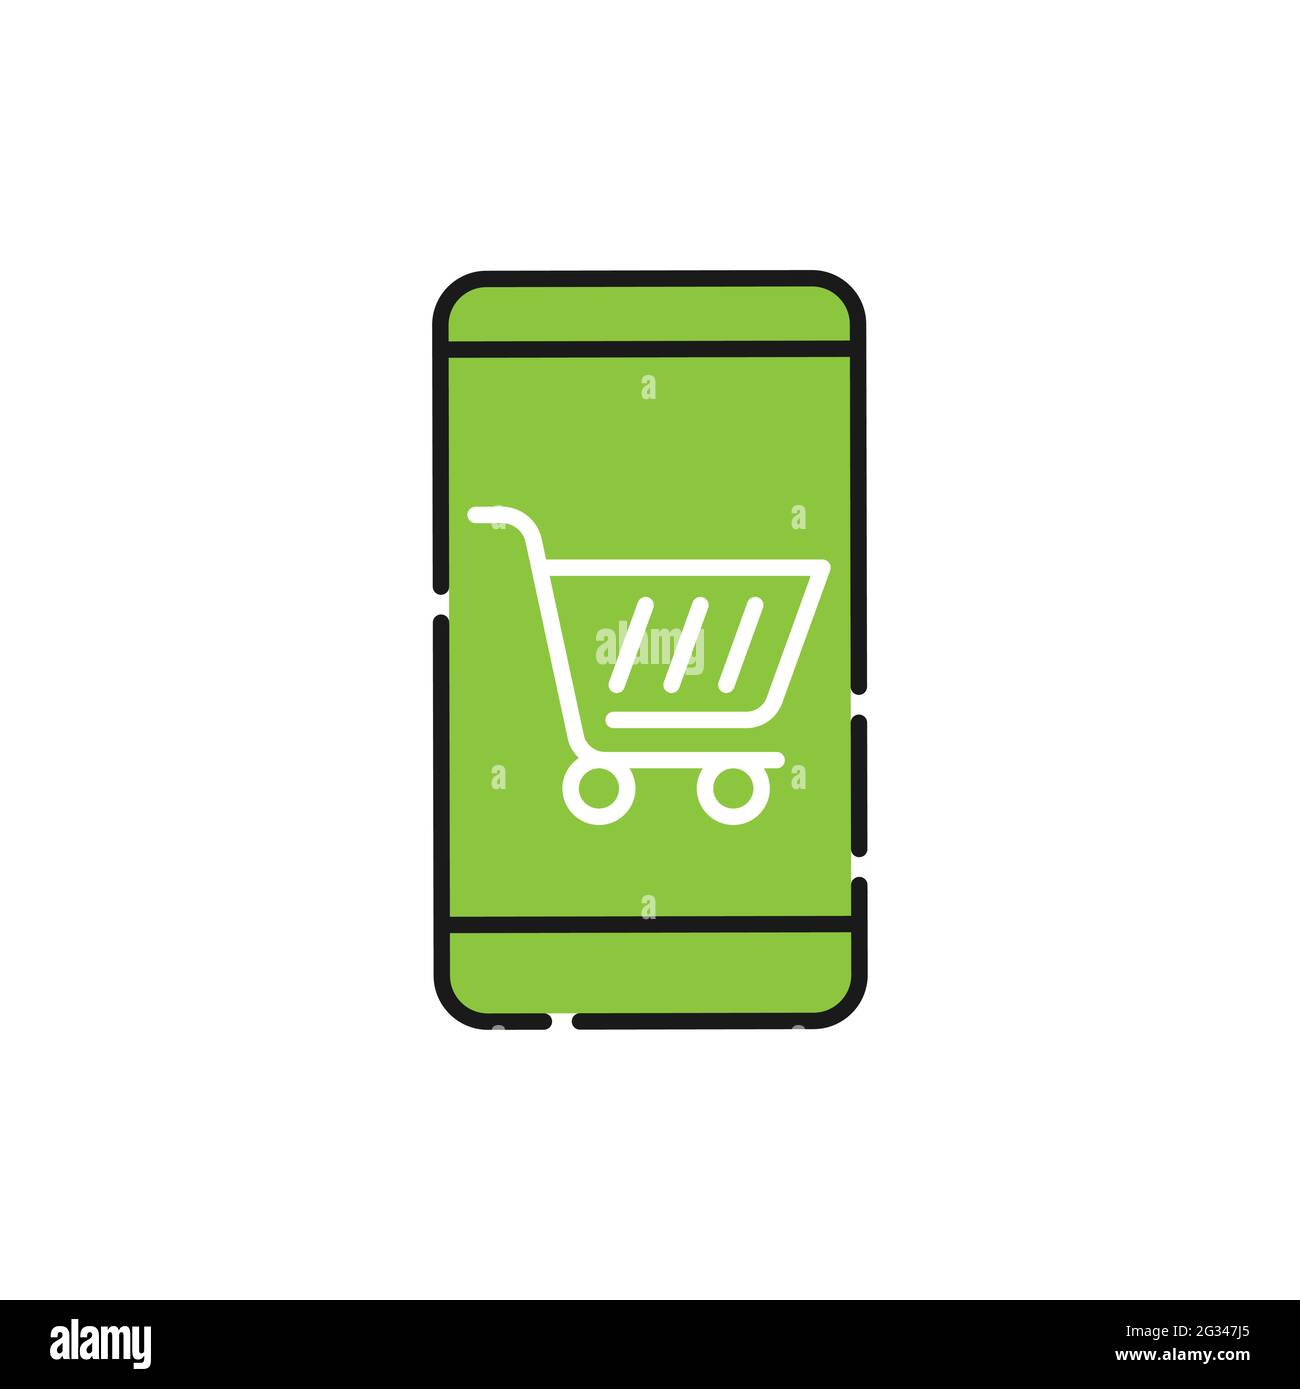 Shopping Cart with mobile phone icon Vector Design. Shopping Cart icon with smartphone design concept for e-commerce, online store and marketplace web Stock Vector